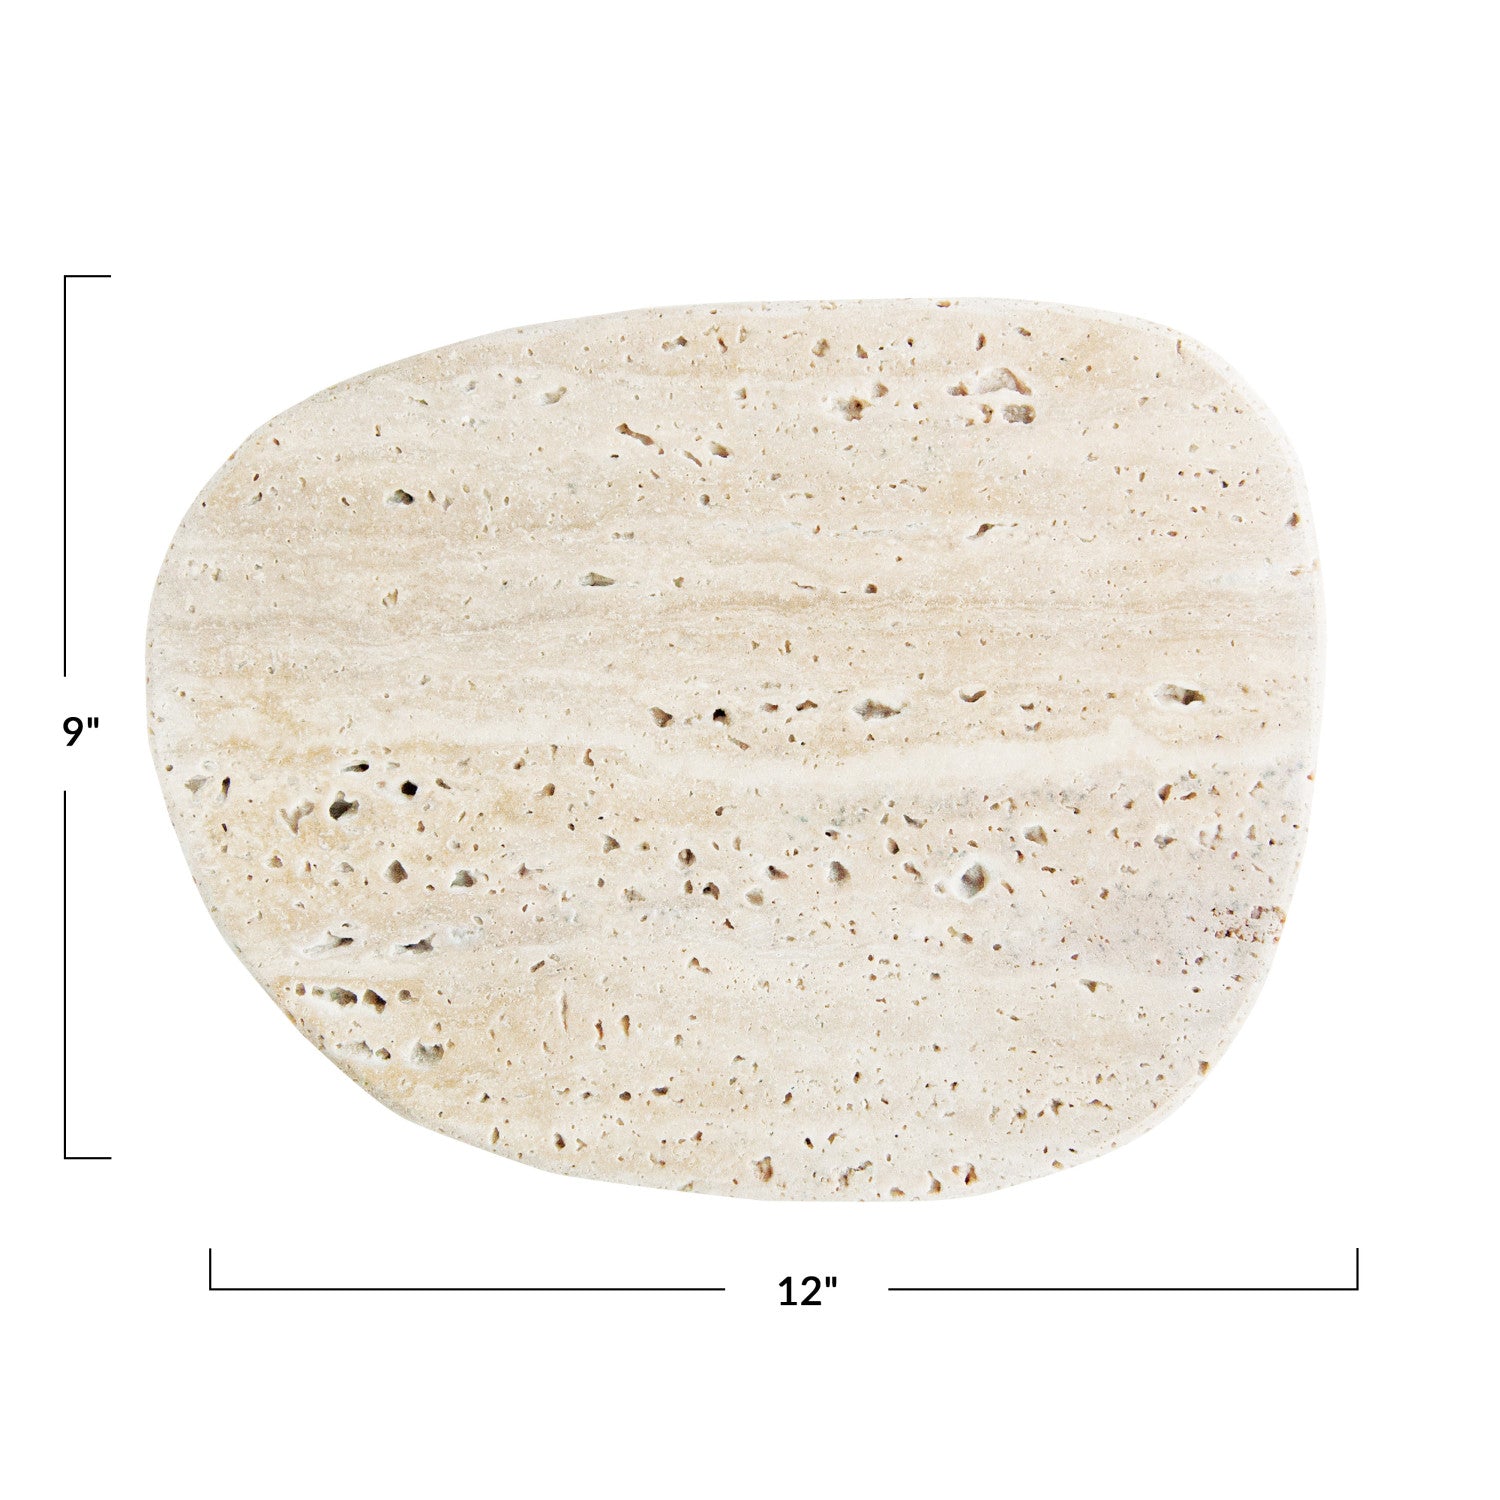 12"L x 9"W Travertine Organic Shaped Cheese/Cutting Board, Natural (Each One Will Vary)